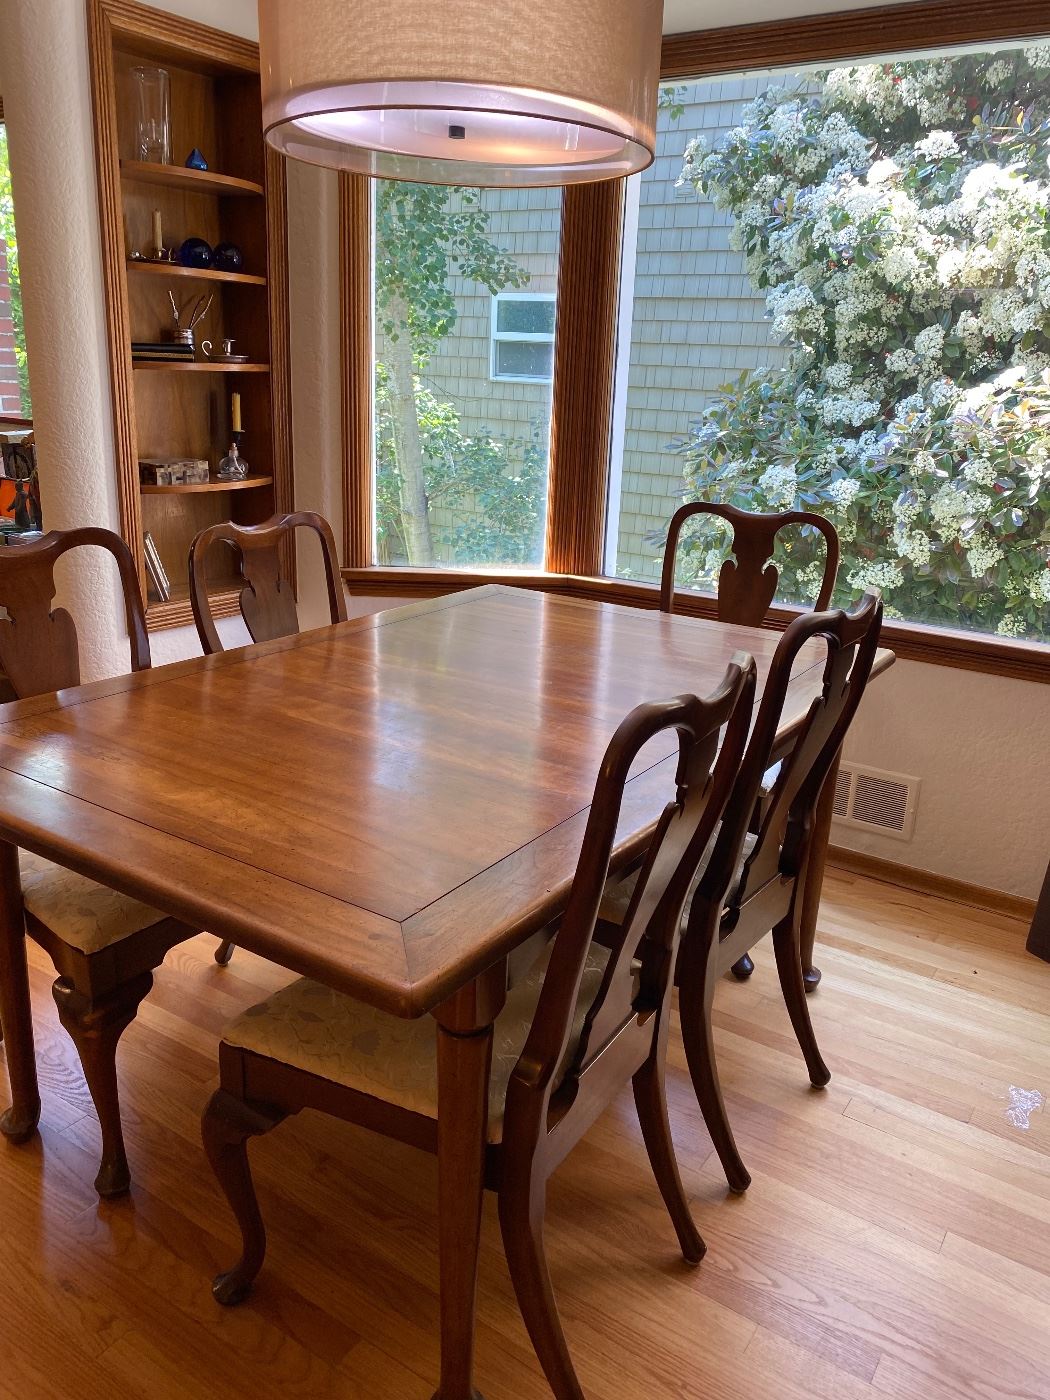 $380 Dining table with six chairs and two leaves. Table measures 64 inches long by 41.5 inches wide by 29.5 inches high. It comes with two 12” leaves and table pads.  (As found)